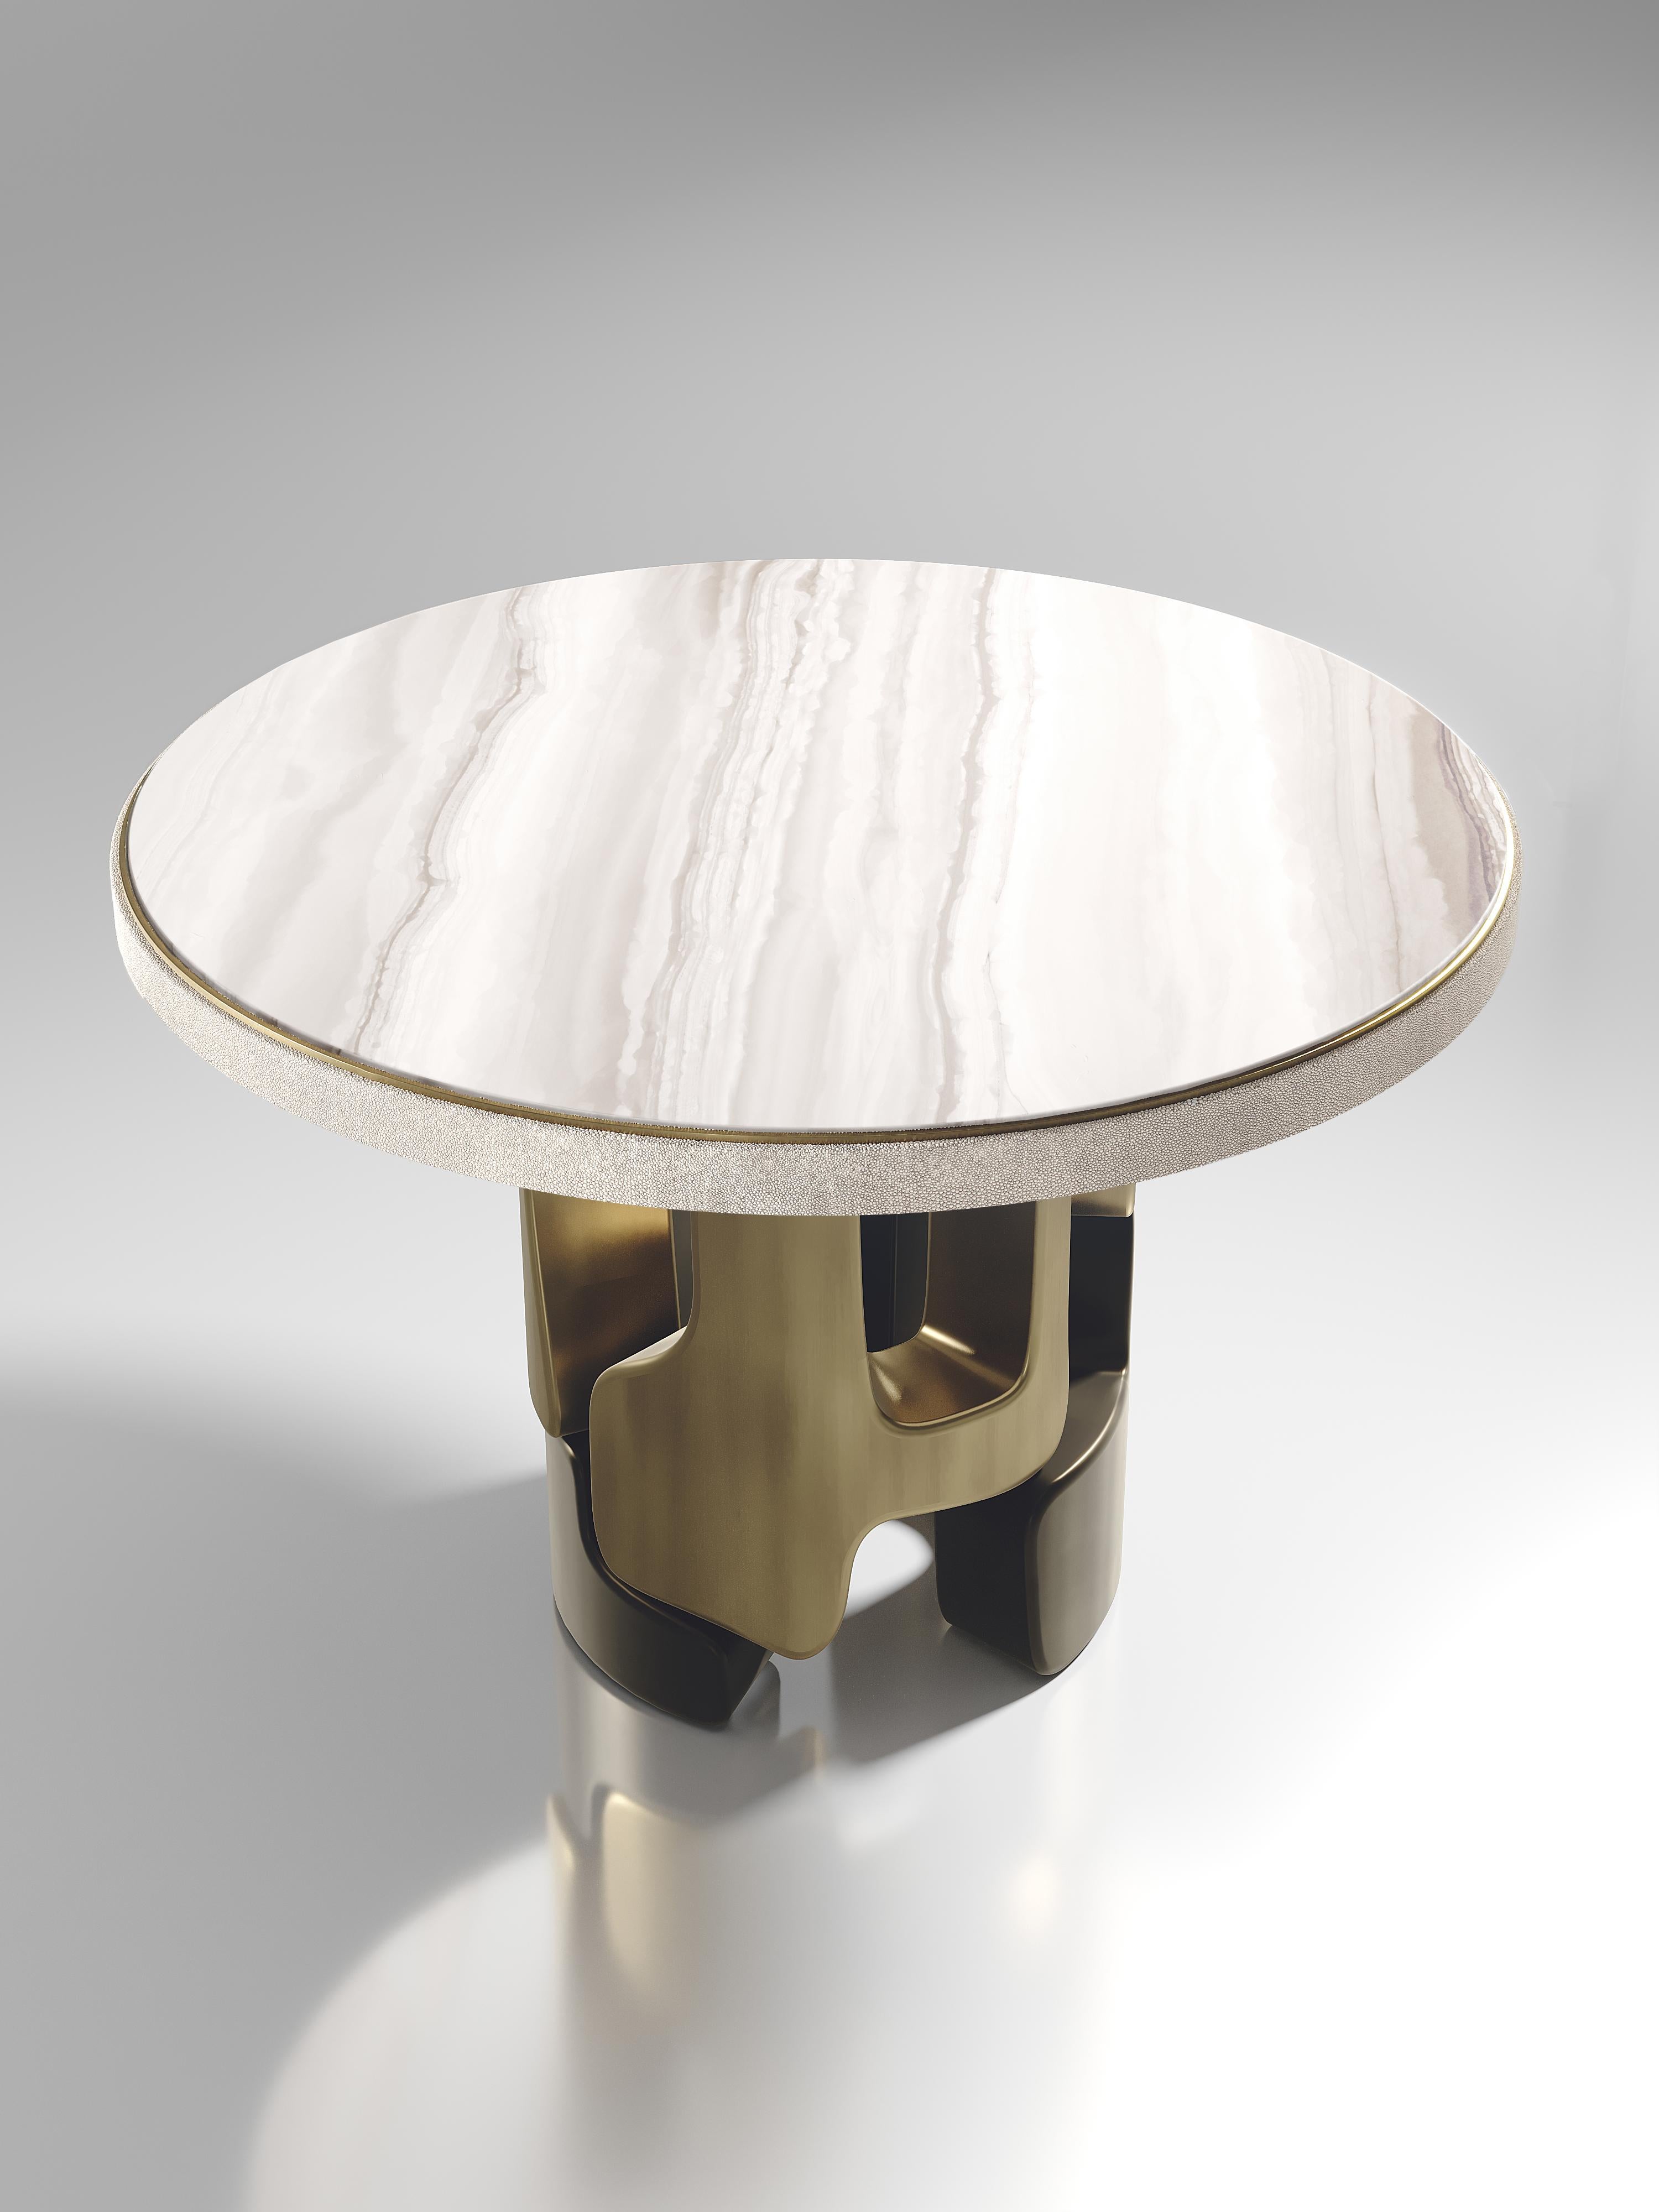 The Apoli breakfast table by Kifu Paris is both dramatic and organic its unique design. The onyx top sits on an ethereal geometric and sculptural bronze-patina brass base. This piece is designed by Kifu Augousti the daughter of Ria and Yiouri